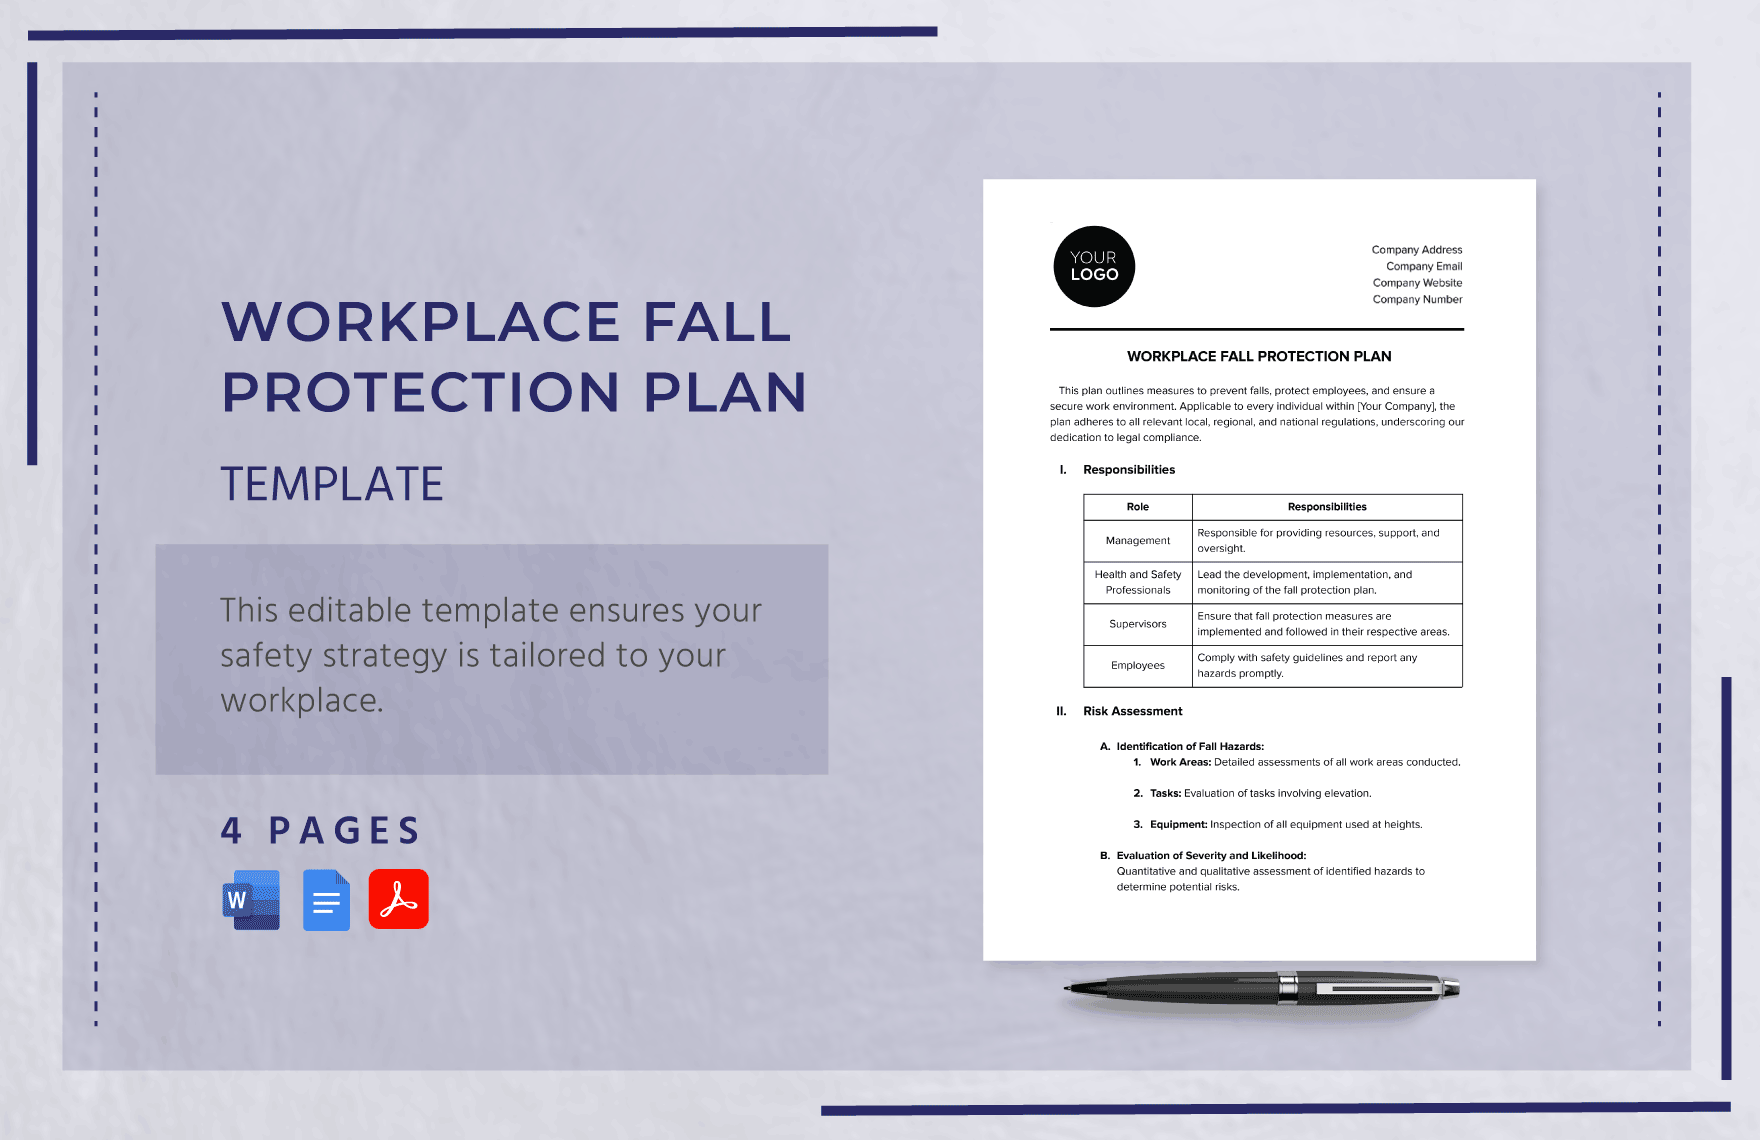 Workplace Fall Protection Plan Template in Word, Google Docs, PDF